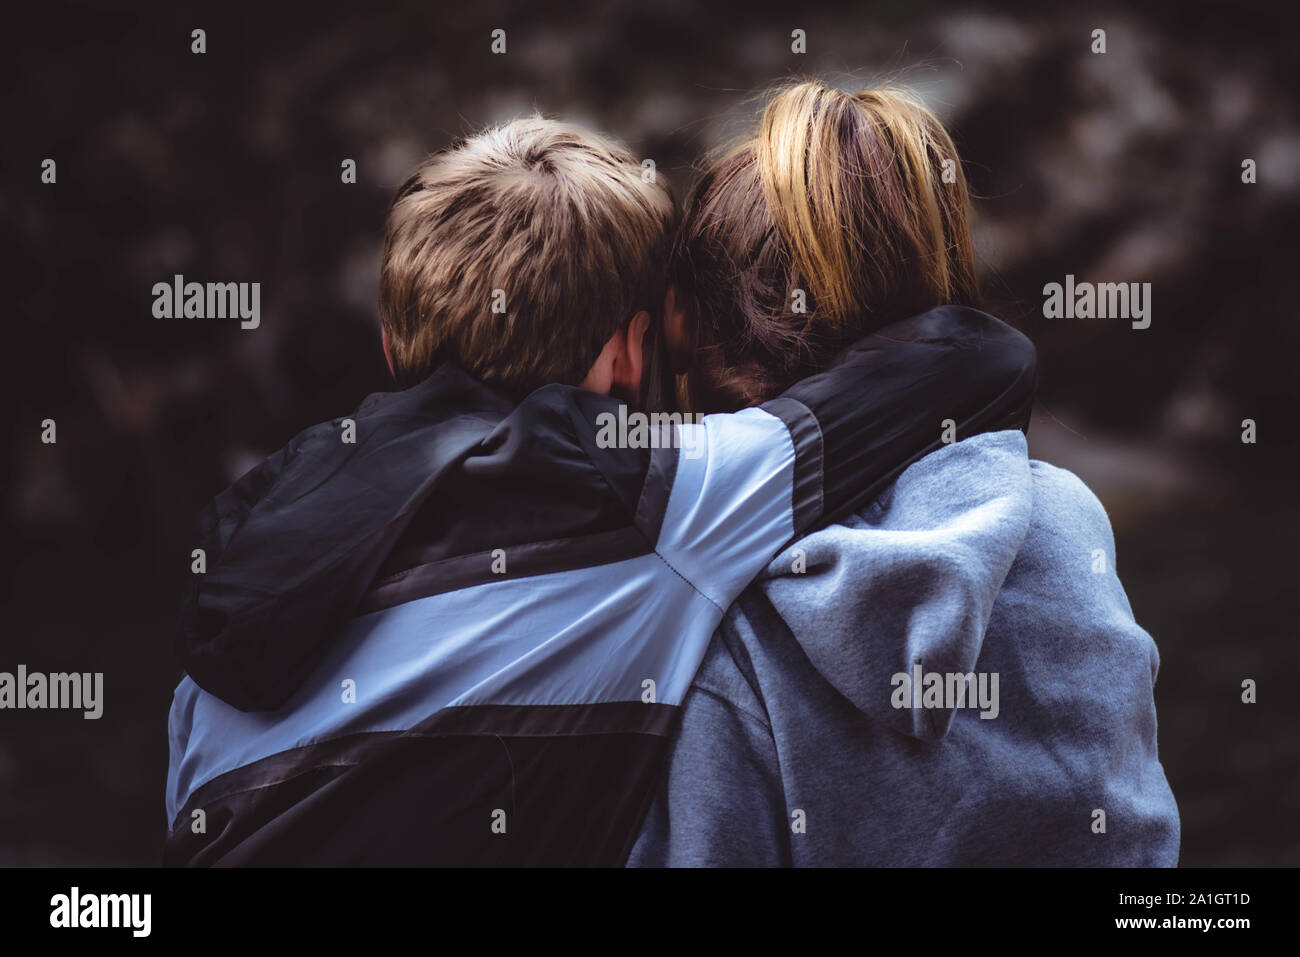 The close up of the backs of the teenage girl and boy hugging outside in the nature. Stock Photo